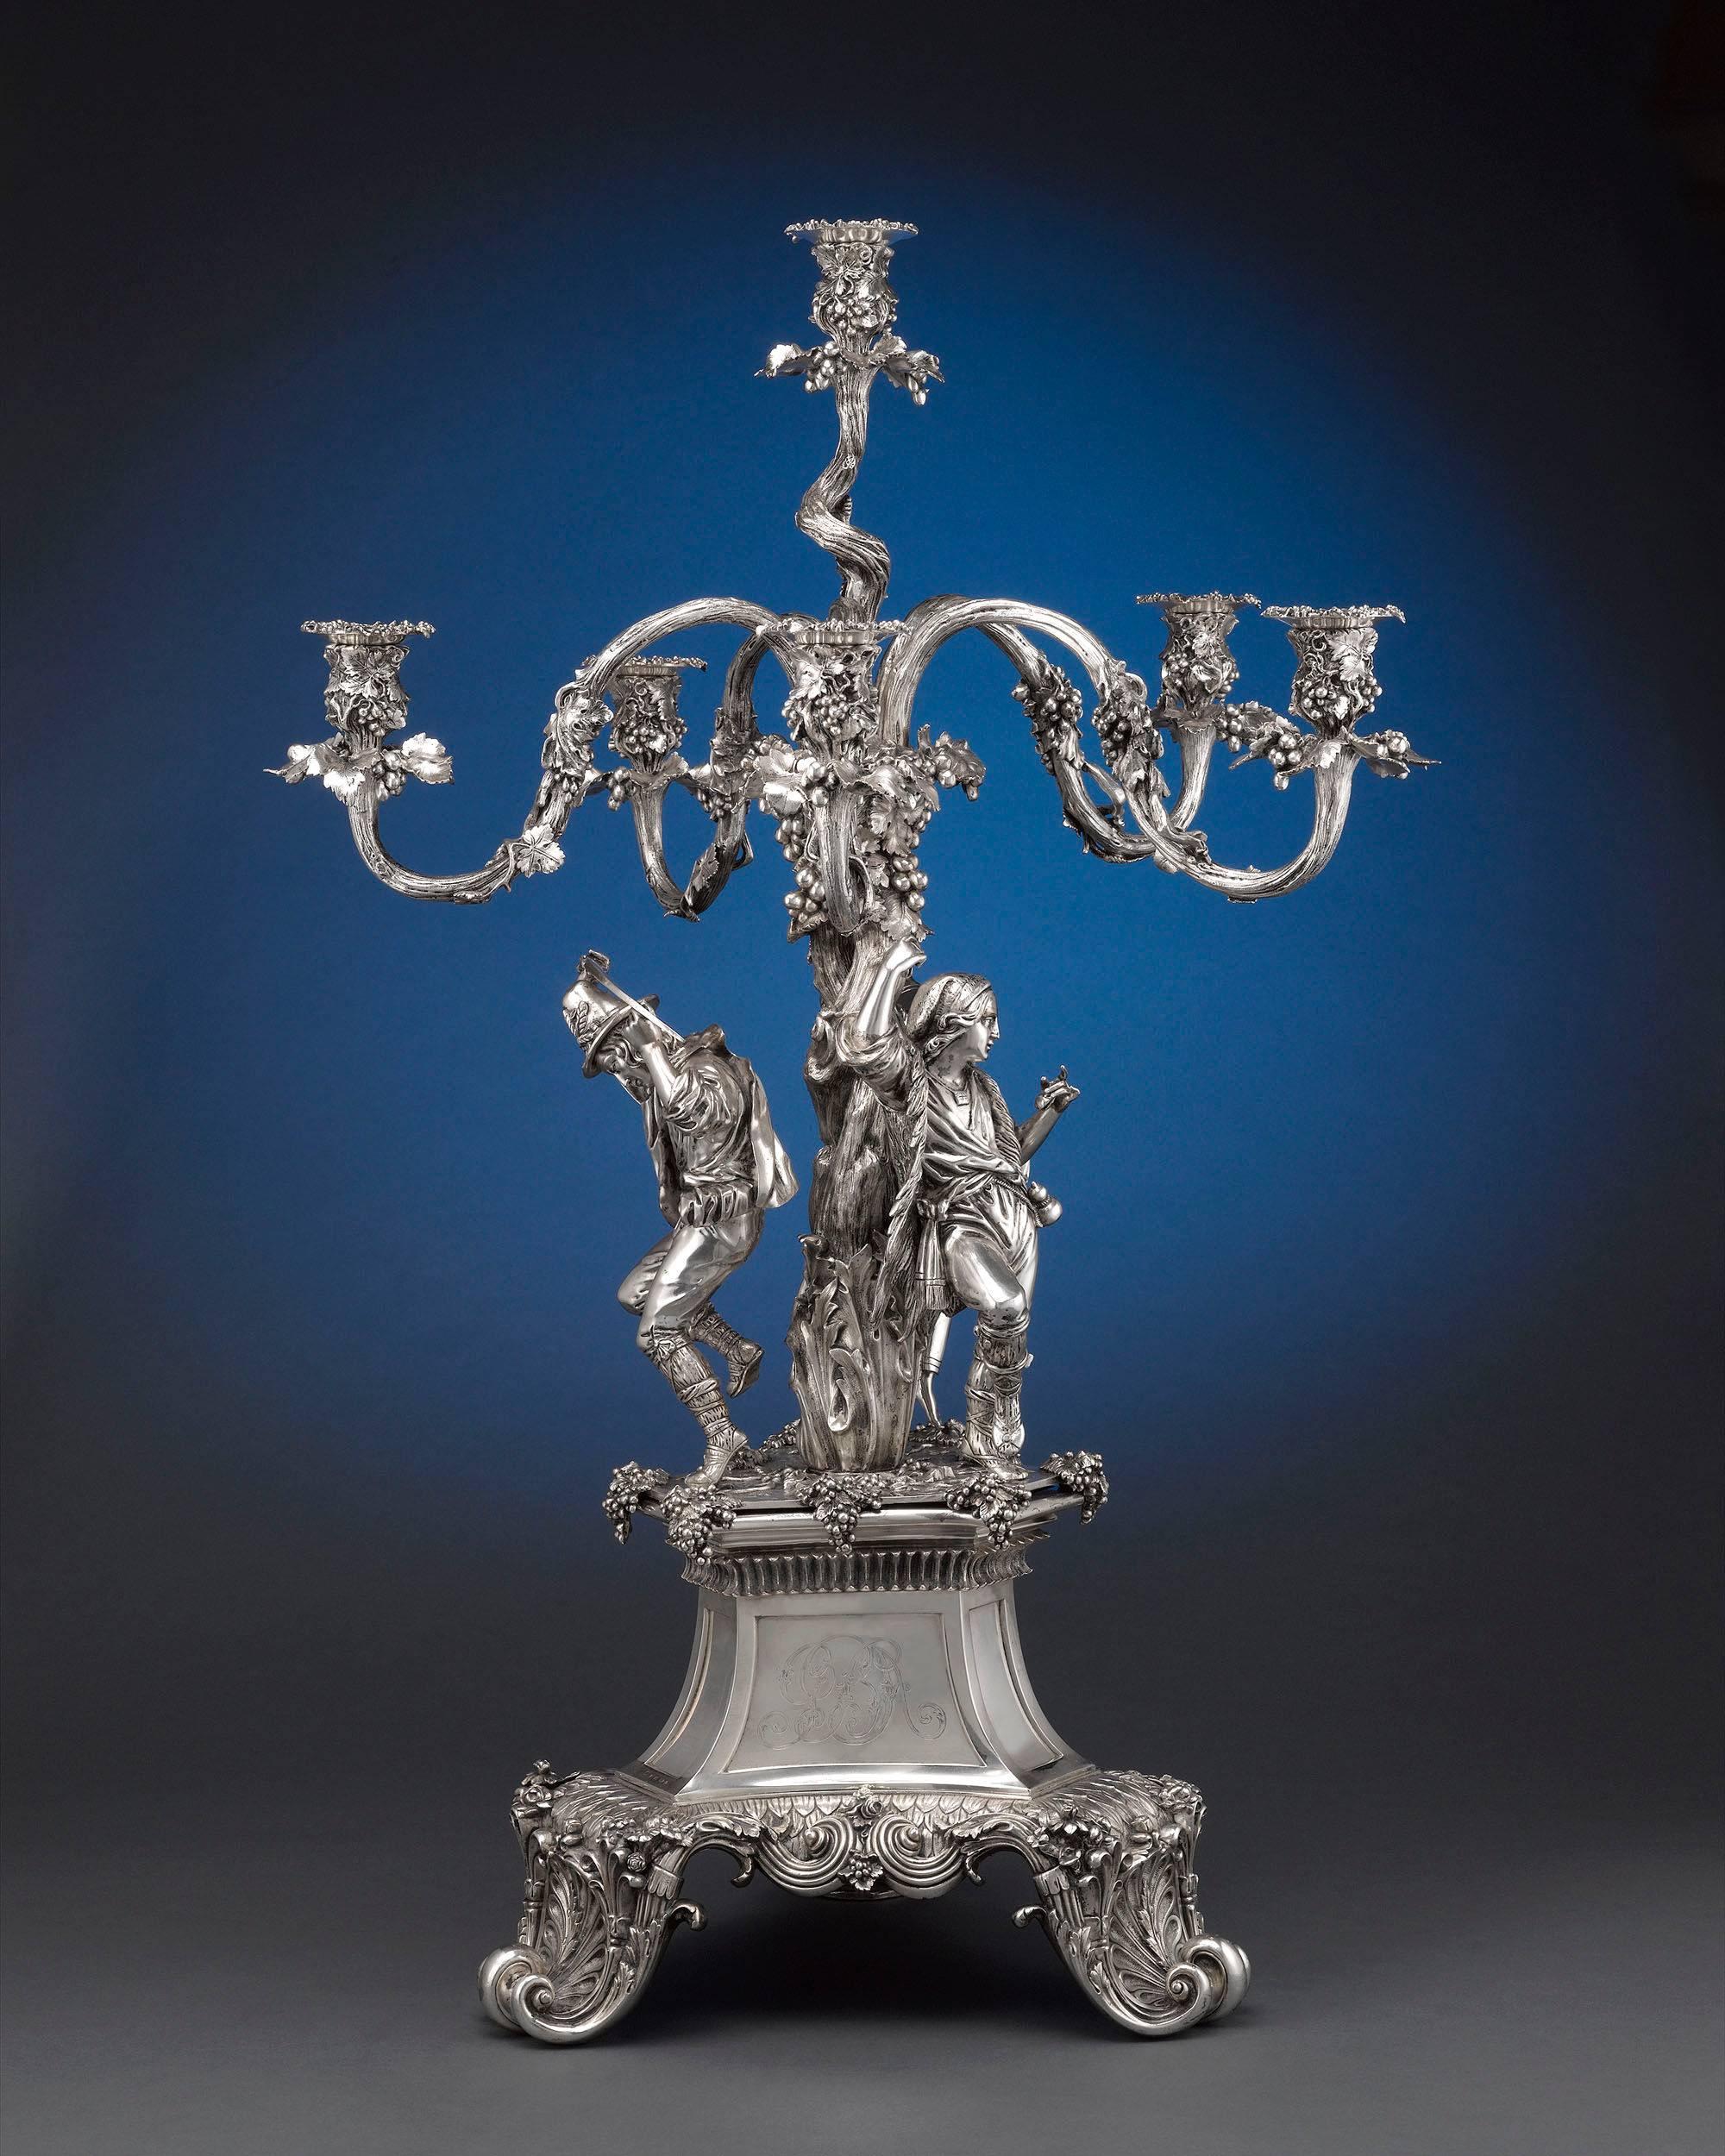 This magnificent silver plate candelabra by the acclaimed Elkington, Mason and Co., masters of silver plating, celebrates the fruits of the harvest. Intricately decorated arms form a grape vine canopy laden with fruit, under which three pastoral